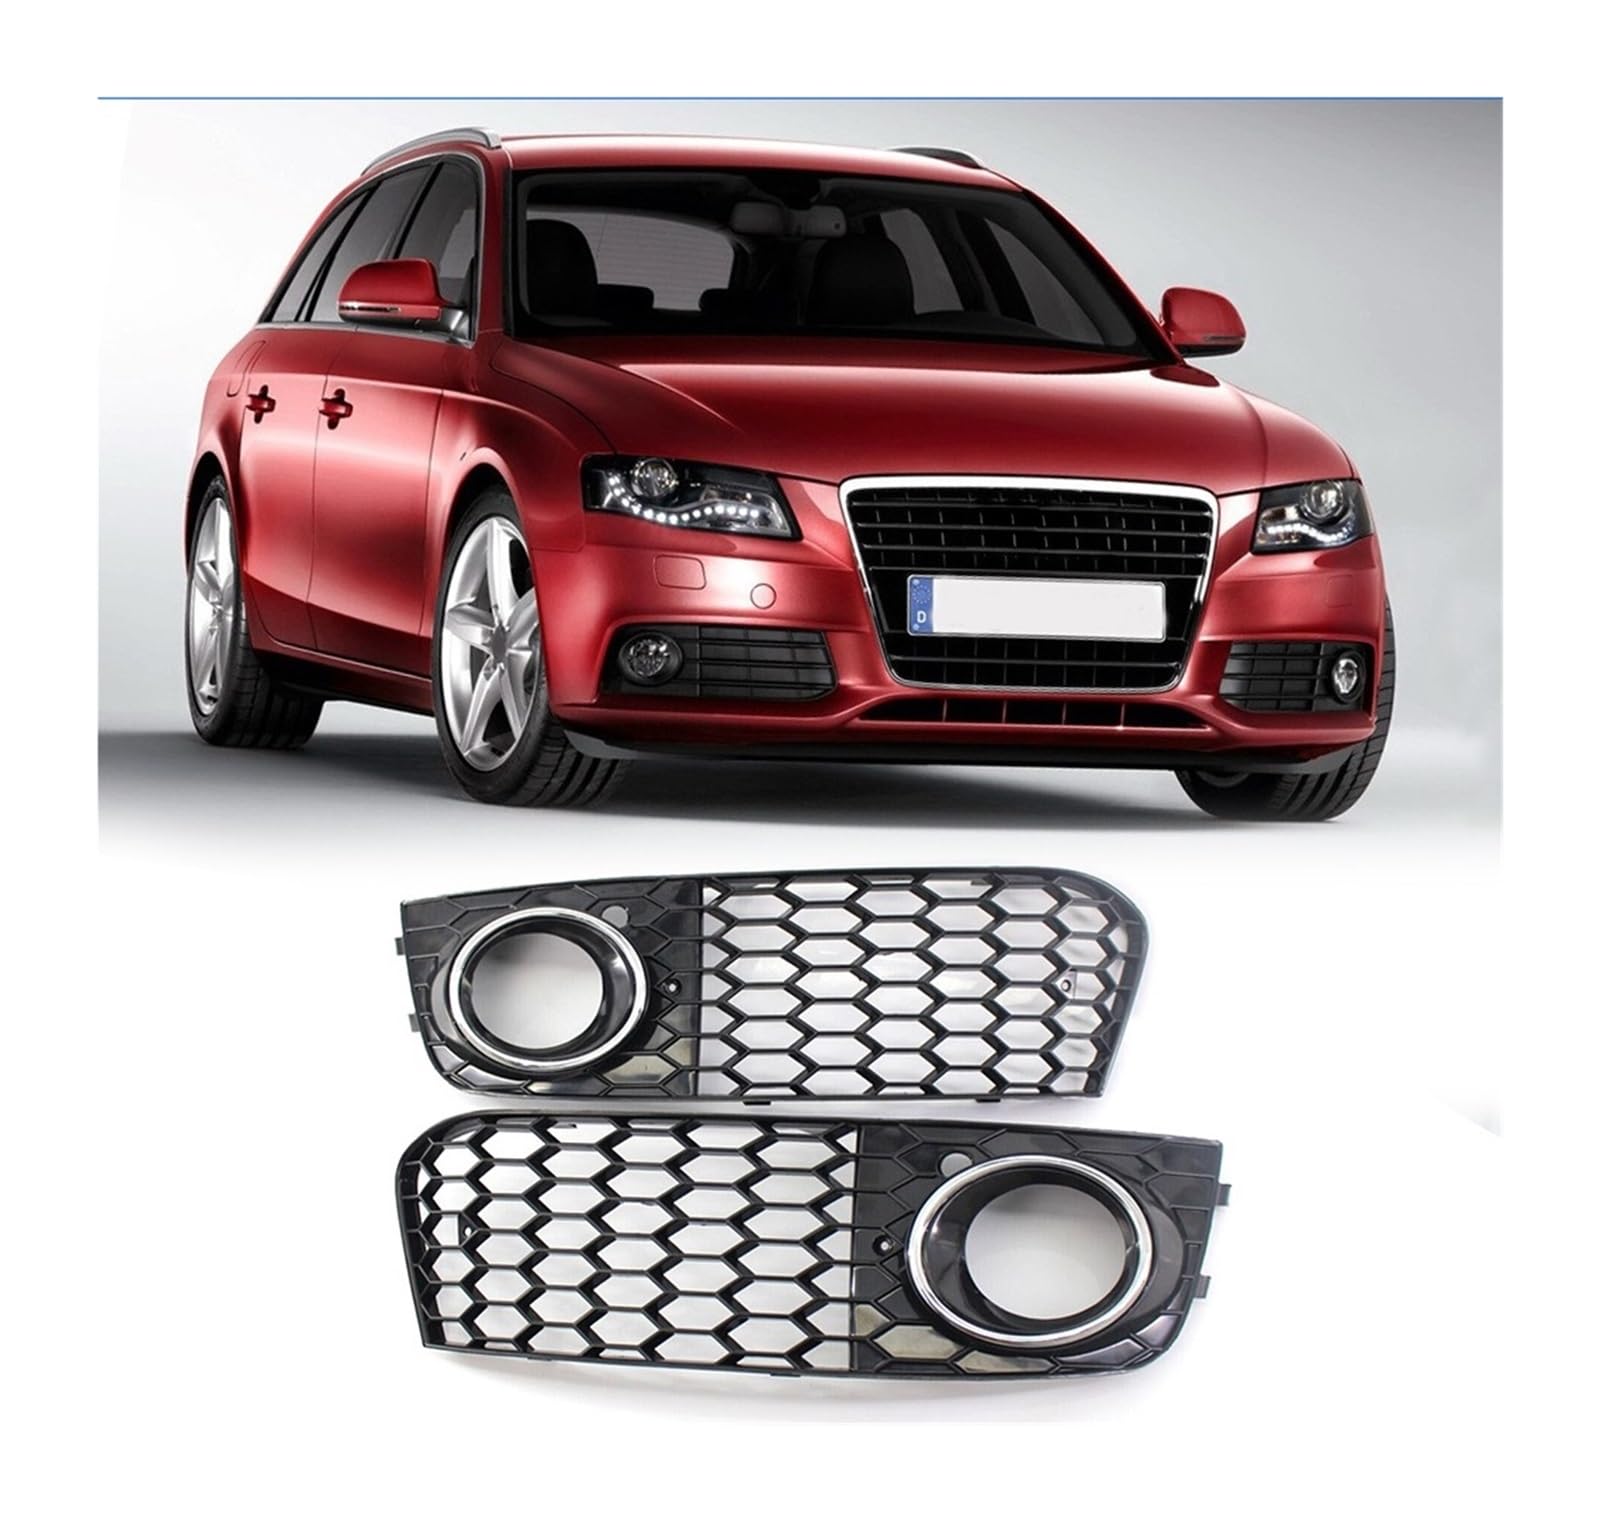 RS4 Style Car Fog Light Grille Grill Intake Cover Honeycomb Mesh Fog Lamp Open Vent Replacement Compatible For AUDI A4 B8 2009-2012(A1) von BRANISLVV